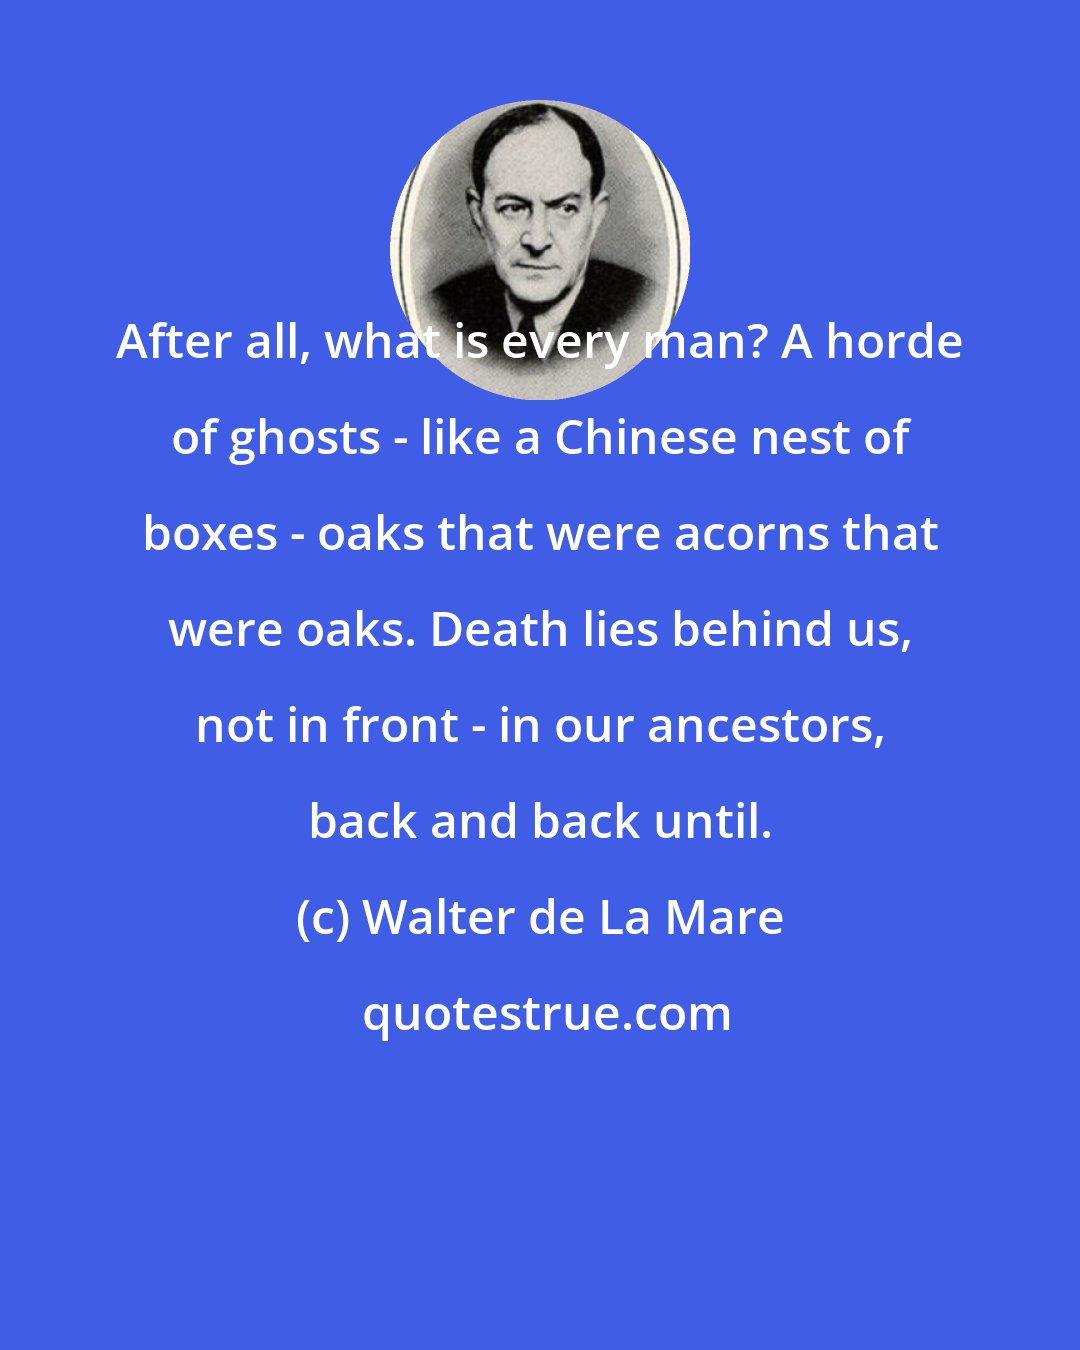 Walter de La Mare: After all, what is every man? A horde of ghosts - like a Chinese nest of boxes - oaks that were acorns that were oaks. Death lies behind us, not in front - in our ancestors, back and back until.